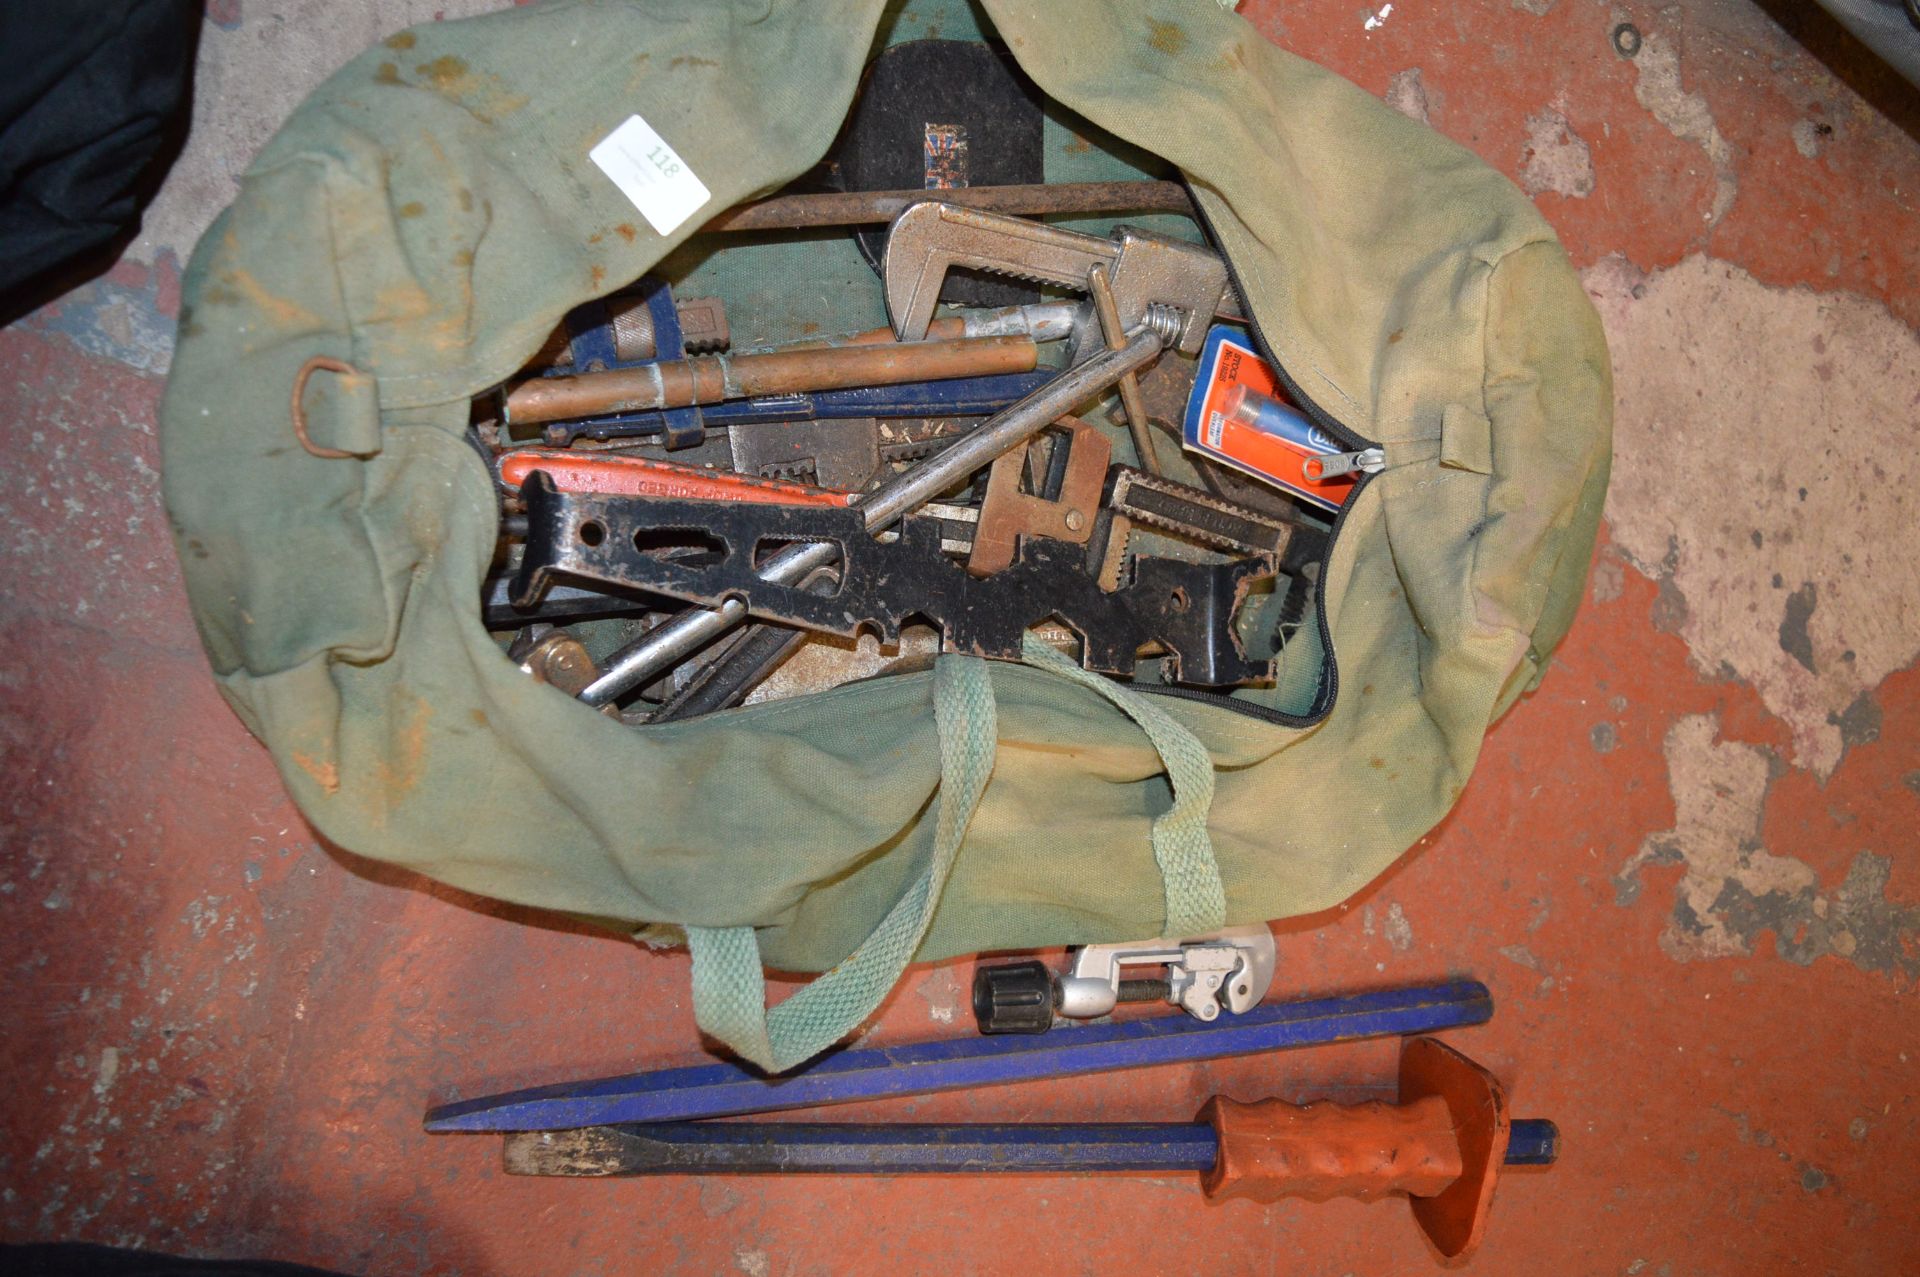 Toolbag Containing Pipe Cutters, Chisels, etc.